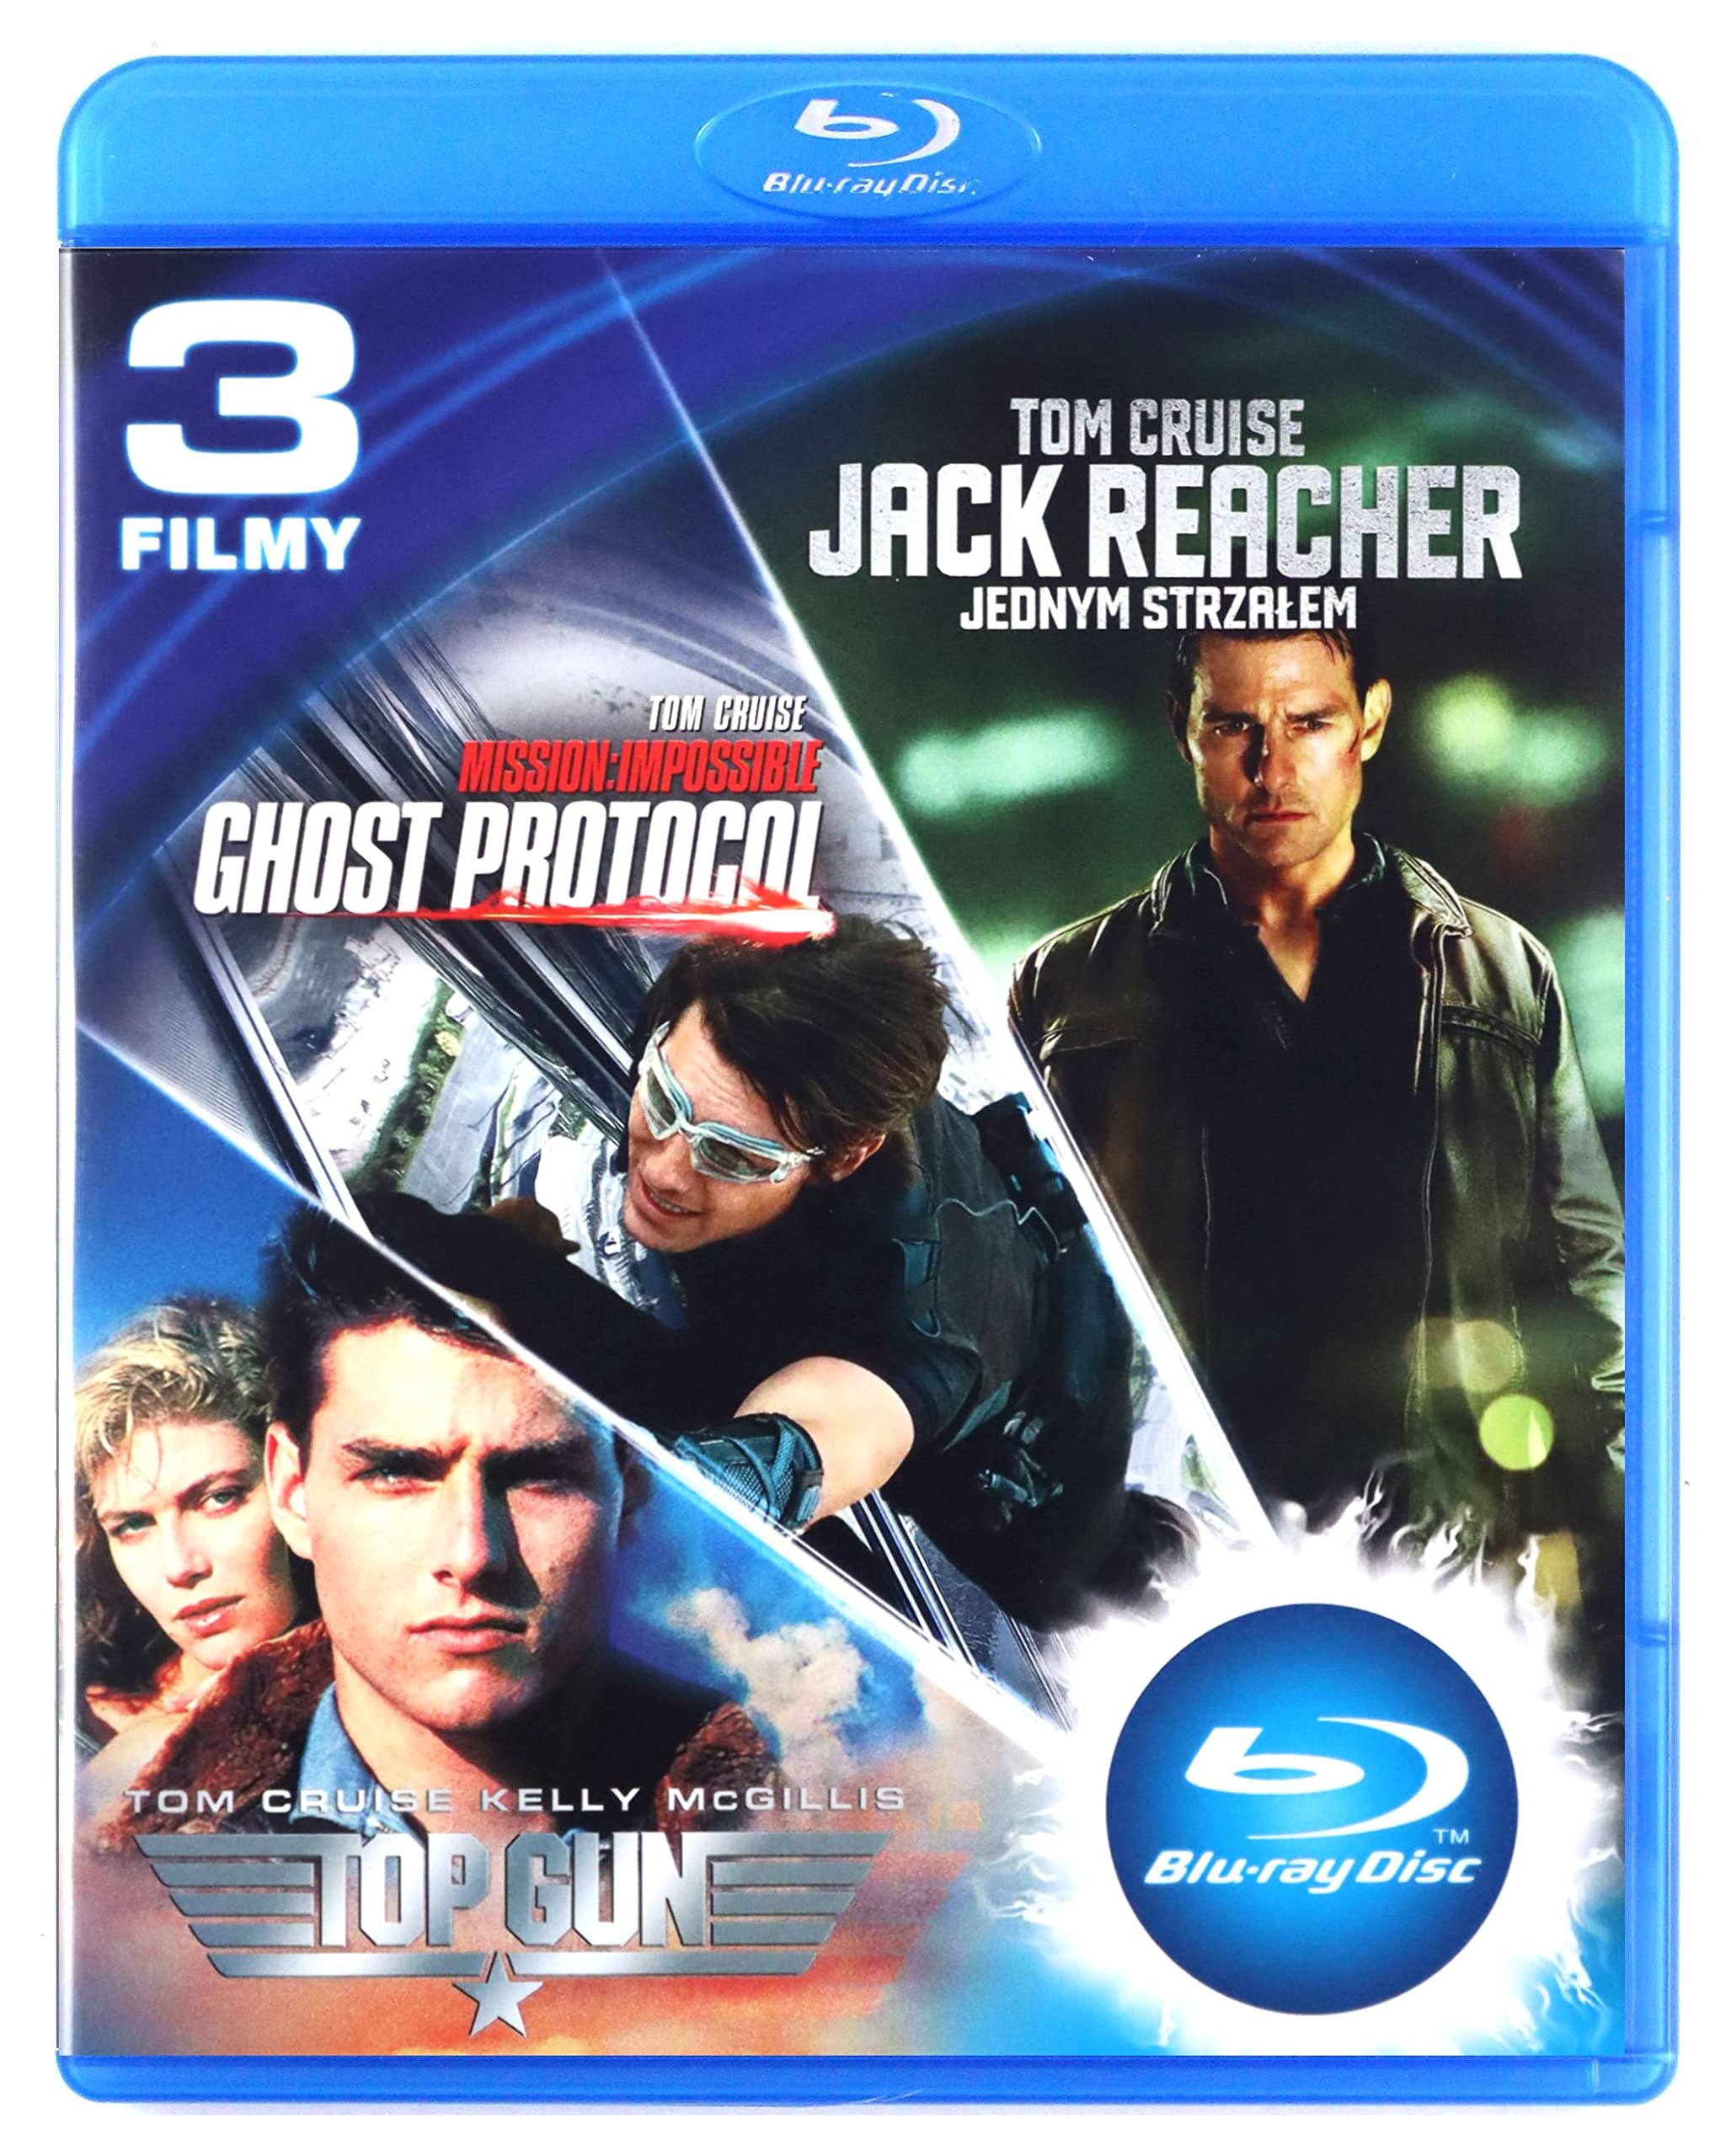 Top Gun / Mission: Impossible 4 - Ghost Protocol / Jack Reacher [3 Blu-ray Box] [PL Import]